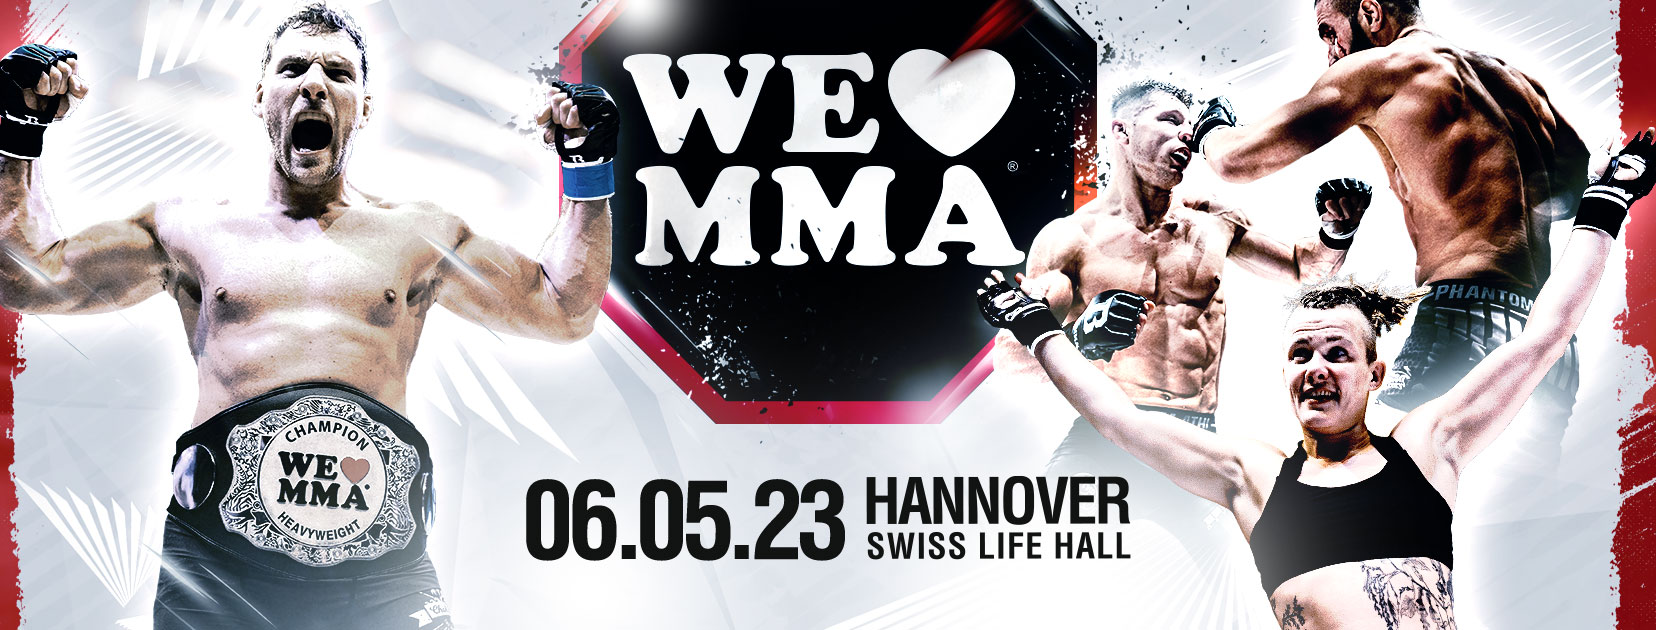 We love MMA Hannover